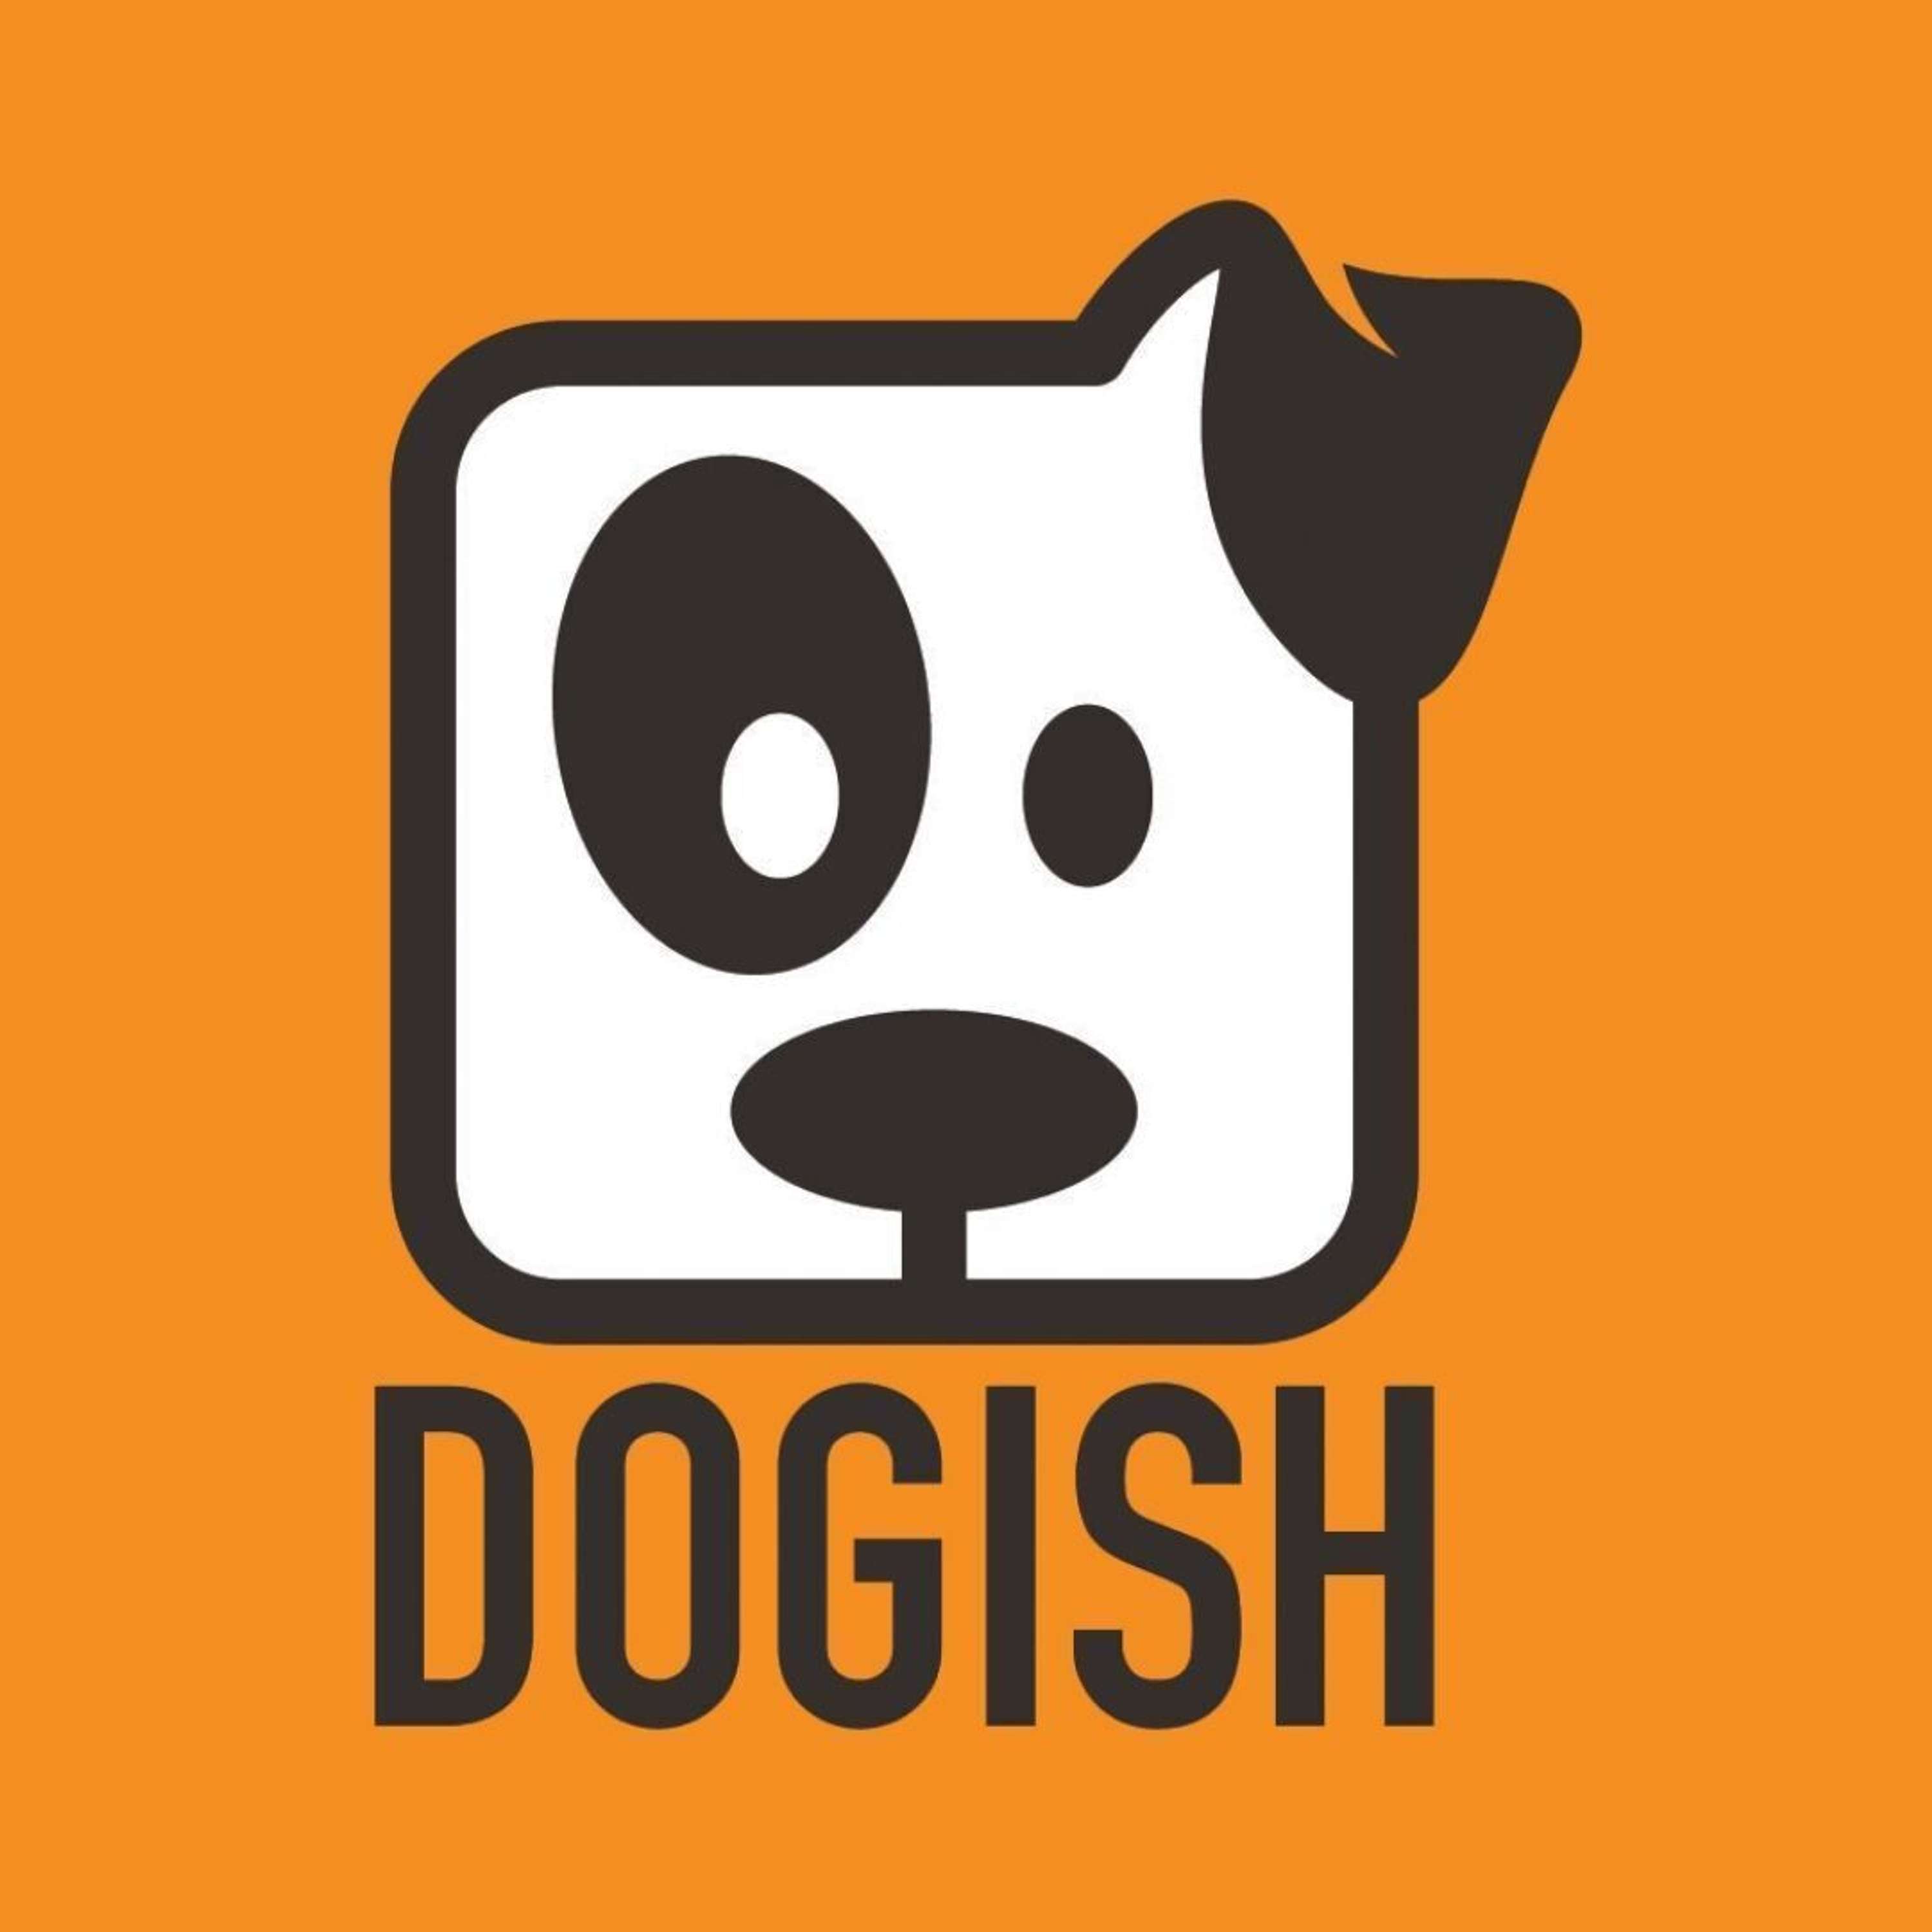 Best Of Dogish Podcast - Dog Owners Outdoor Gear (DOOG) 10/12/21